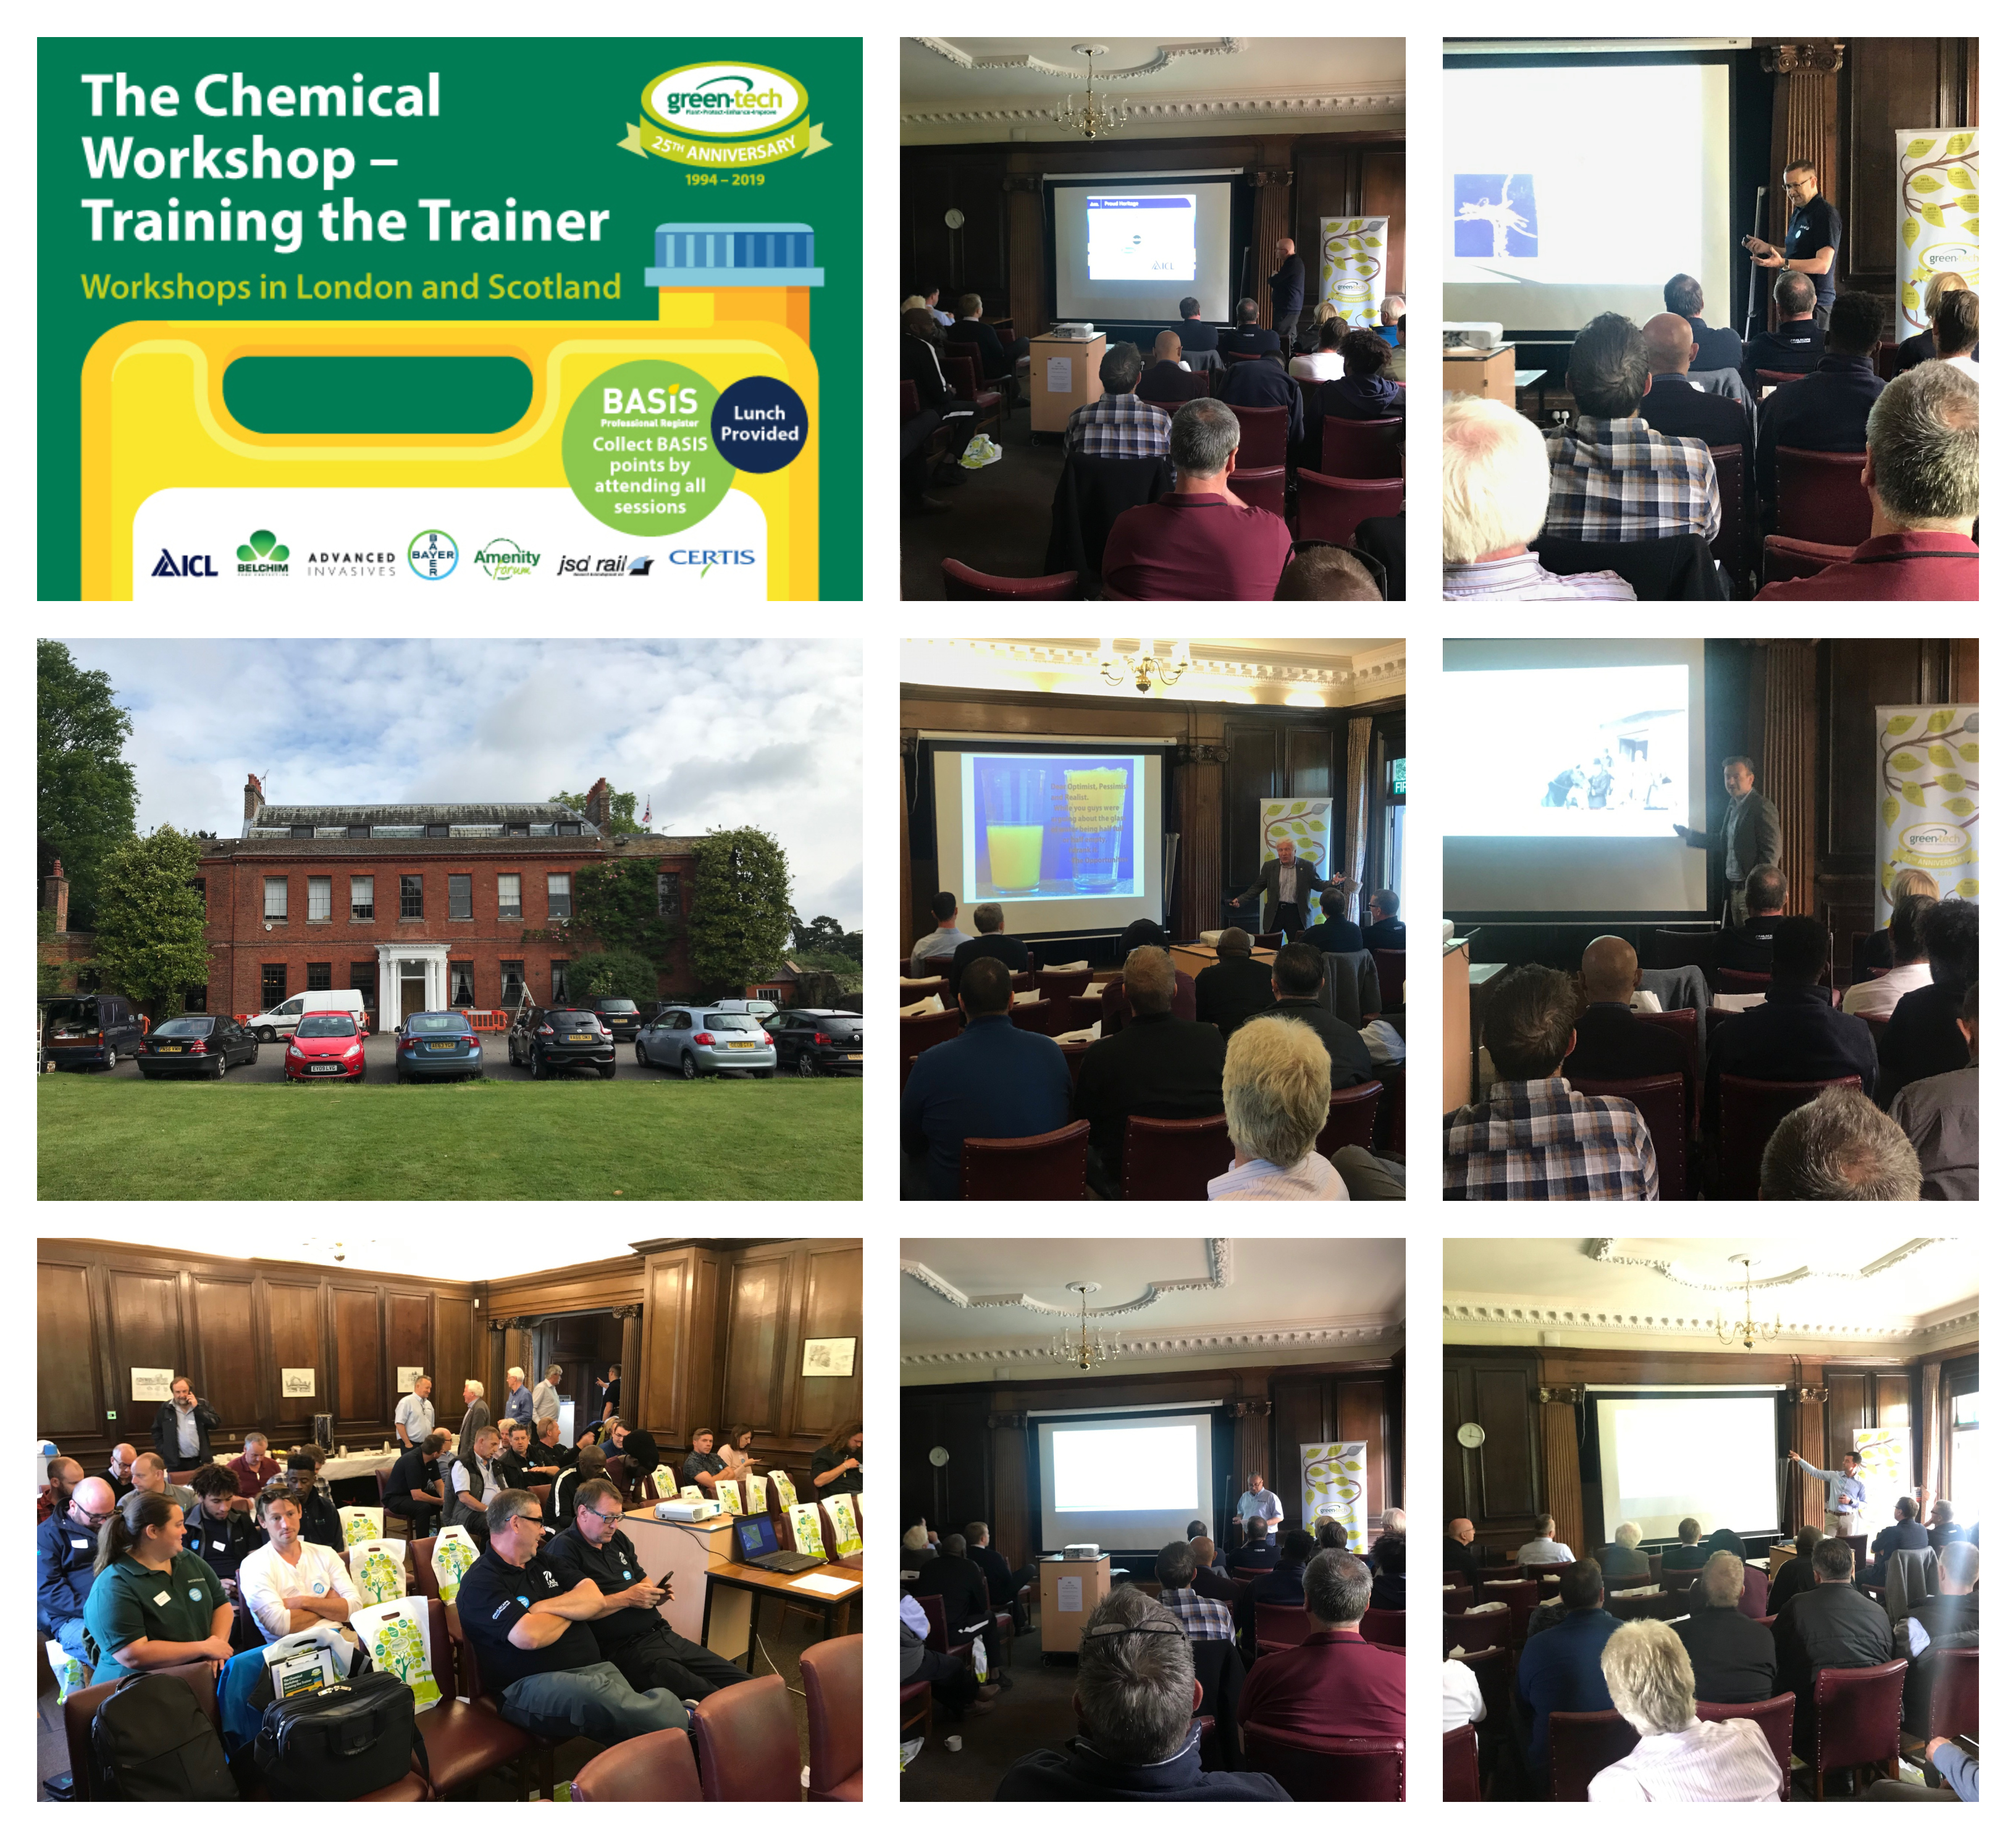 Green-tech’s Successful Training the Trainer Chemical workshop moves on to Scotland